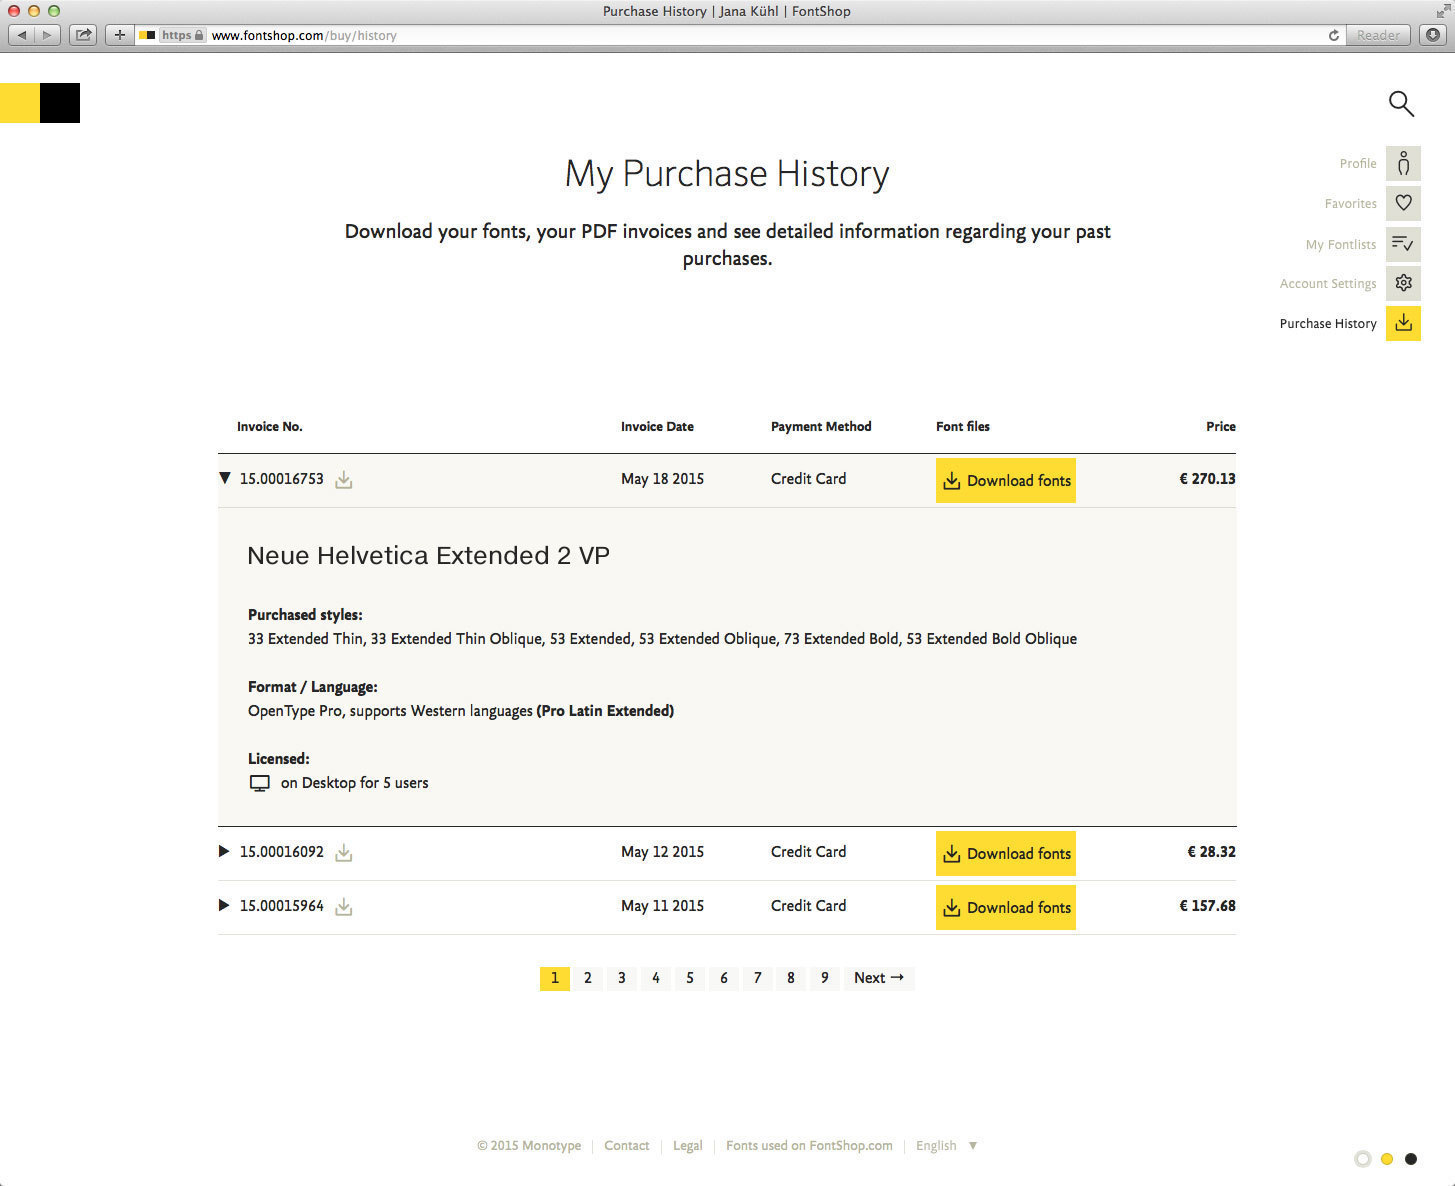 The _My Purchase History_ gives you a complete overview of your purchased items.